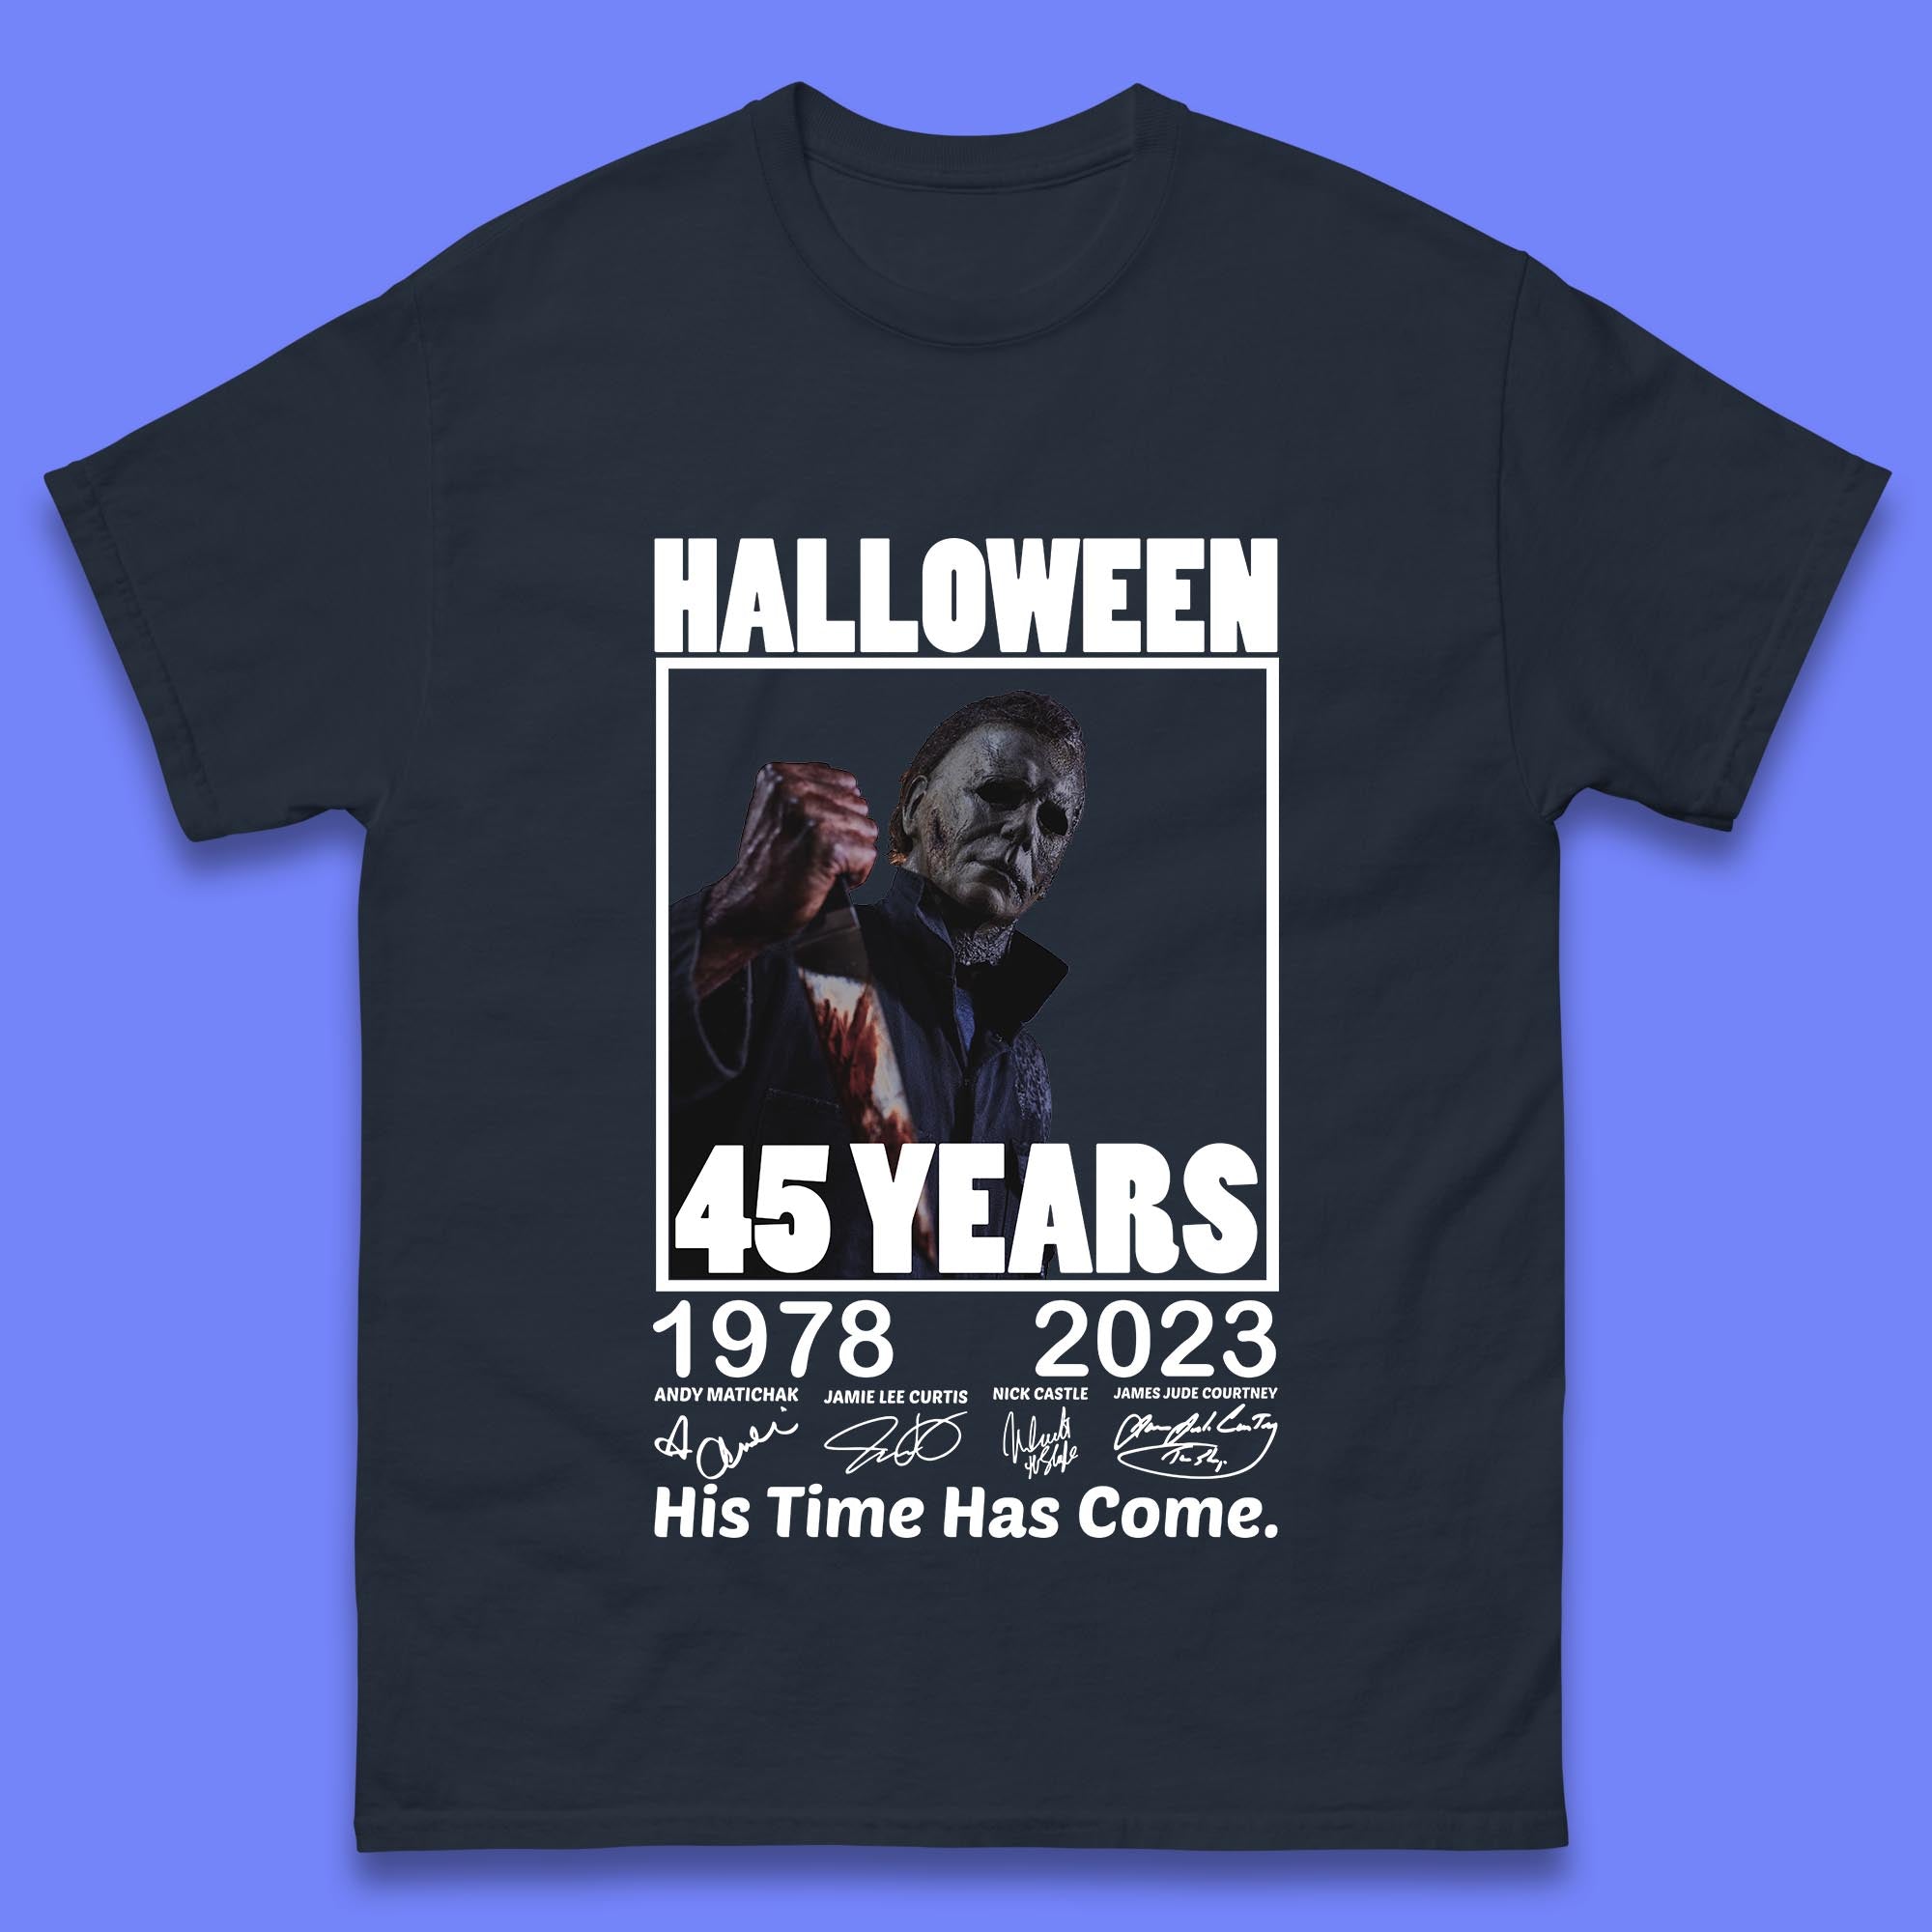 Michael Myers Fictional Character Signatures Halloween 45 Years 1978-2023 His Time Has Come Scary Movie  Mens Tee Top